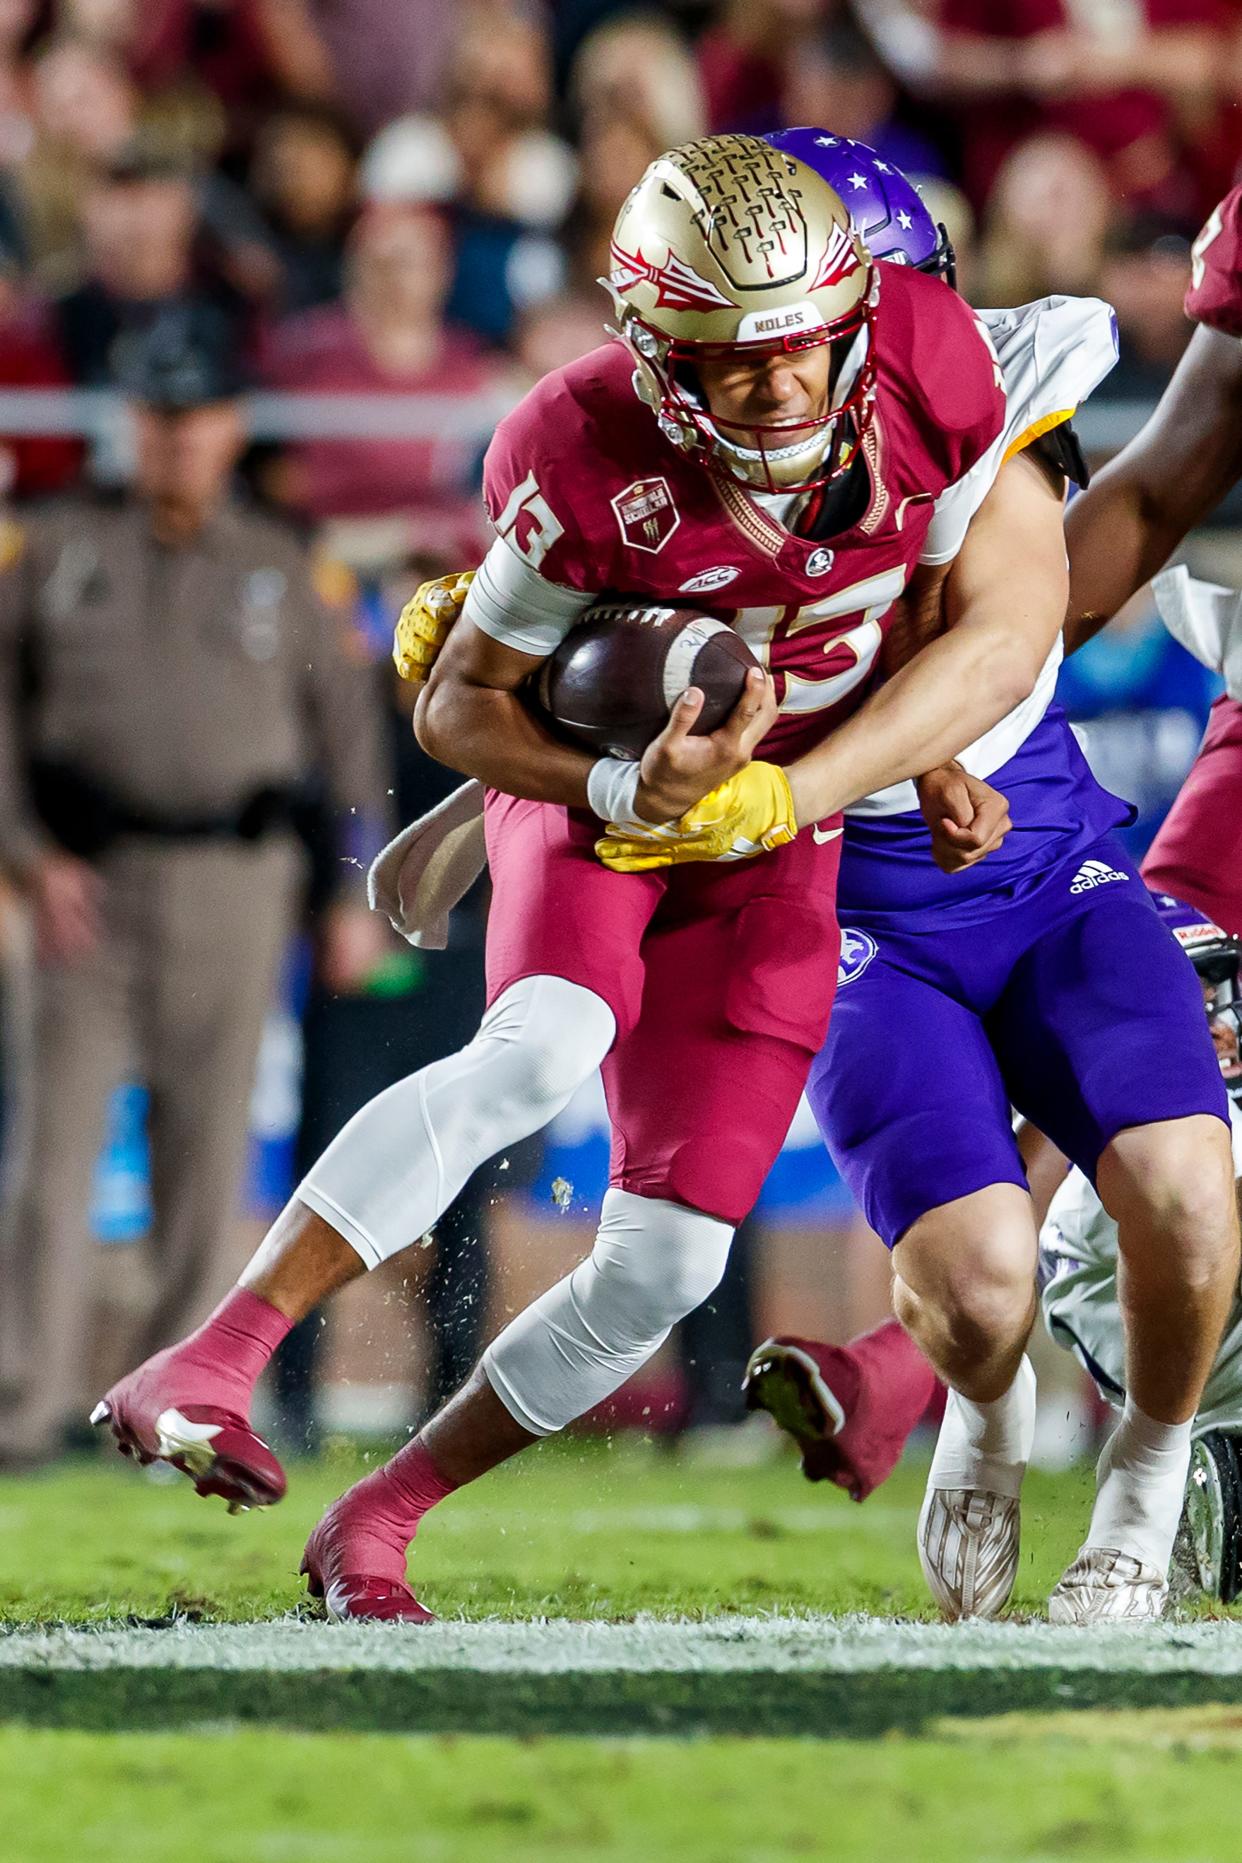 Florida State quarterback Jordan Travis (13) is tackled by North Alabama defensive back Shaun Myers during the first half of an NCAA college football game Saturday, Nov. 18, 2023, in Tallahassee, Fla. Travis was injured on the play. (AP Photo/Colin Hackley)